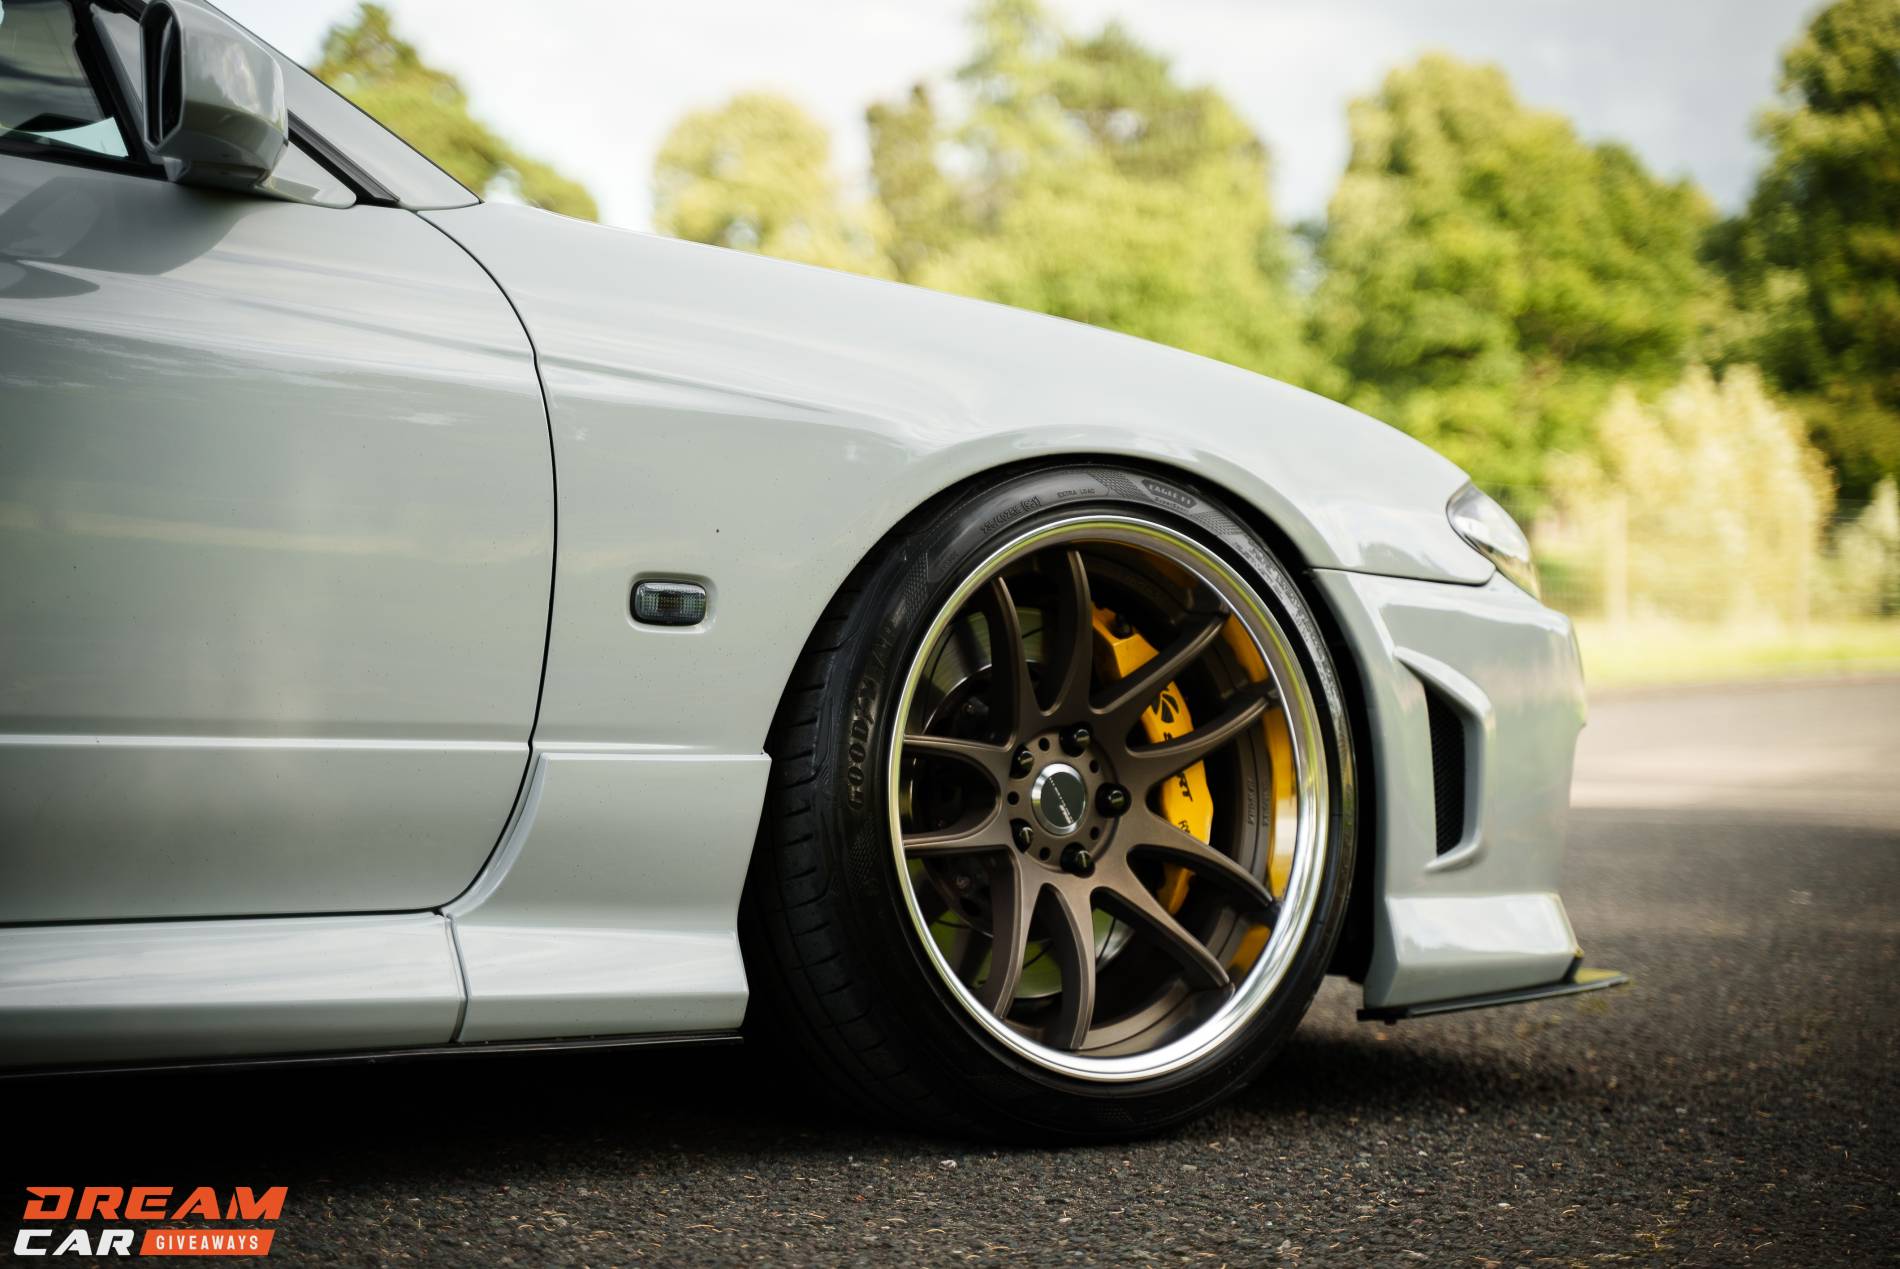 Win this Nissan Silvia S15 Spec R & £1,000